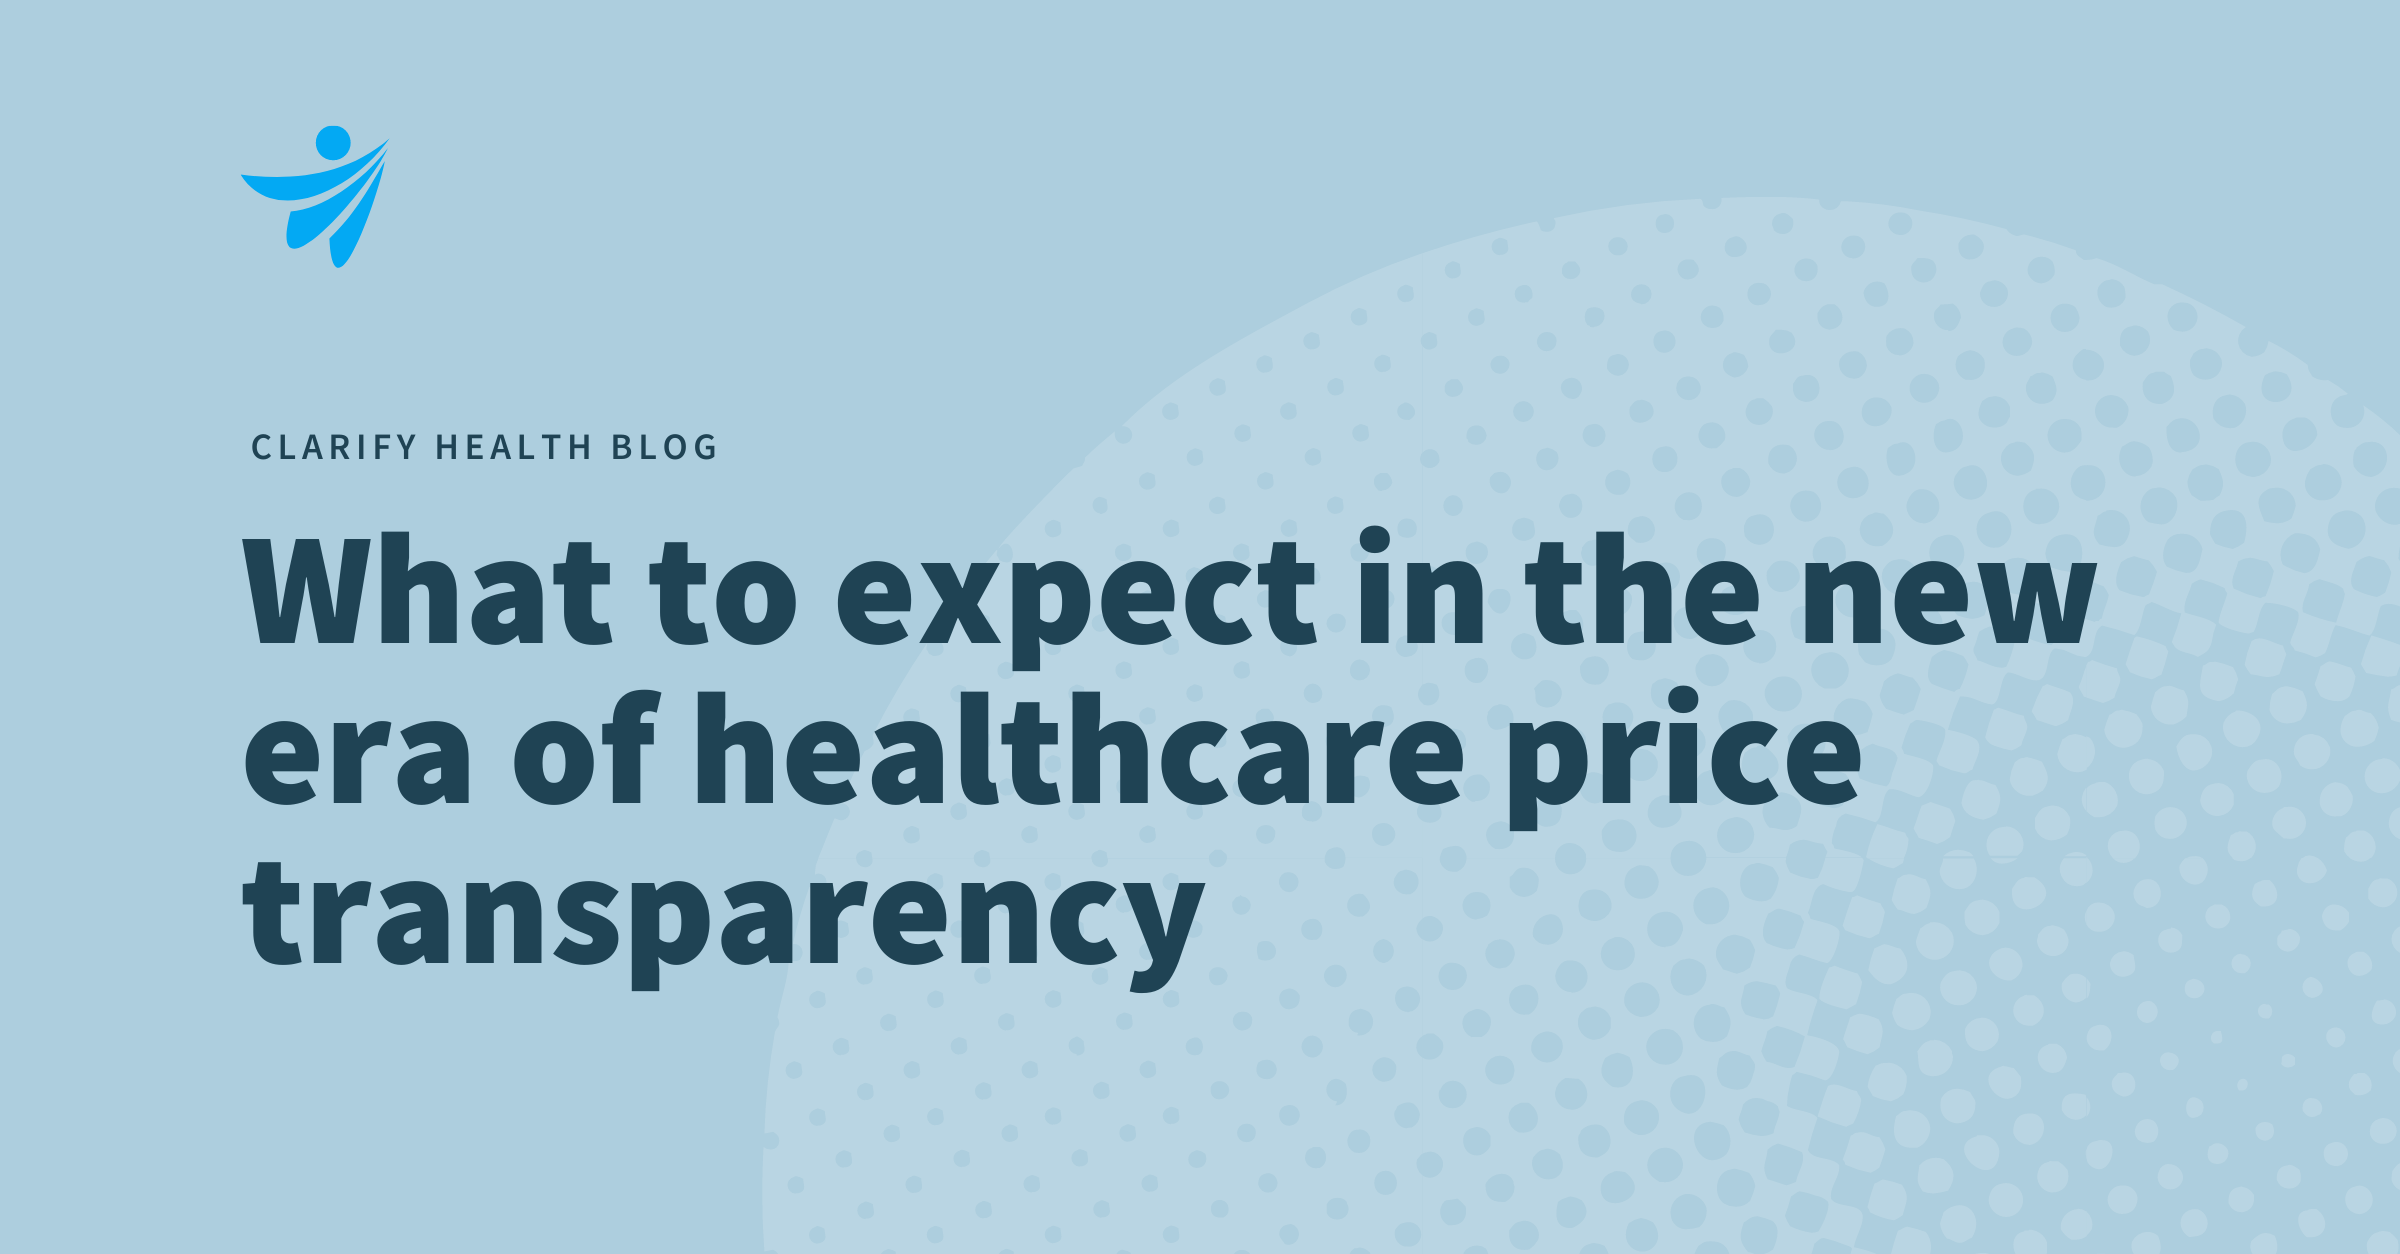 Clarify health blog: What to expect in the new era of healthcare price transparency